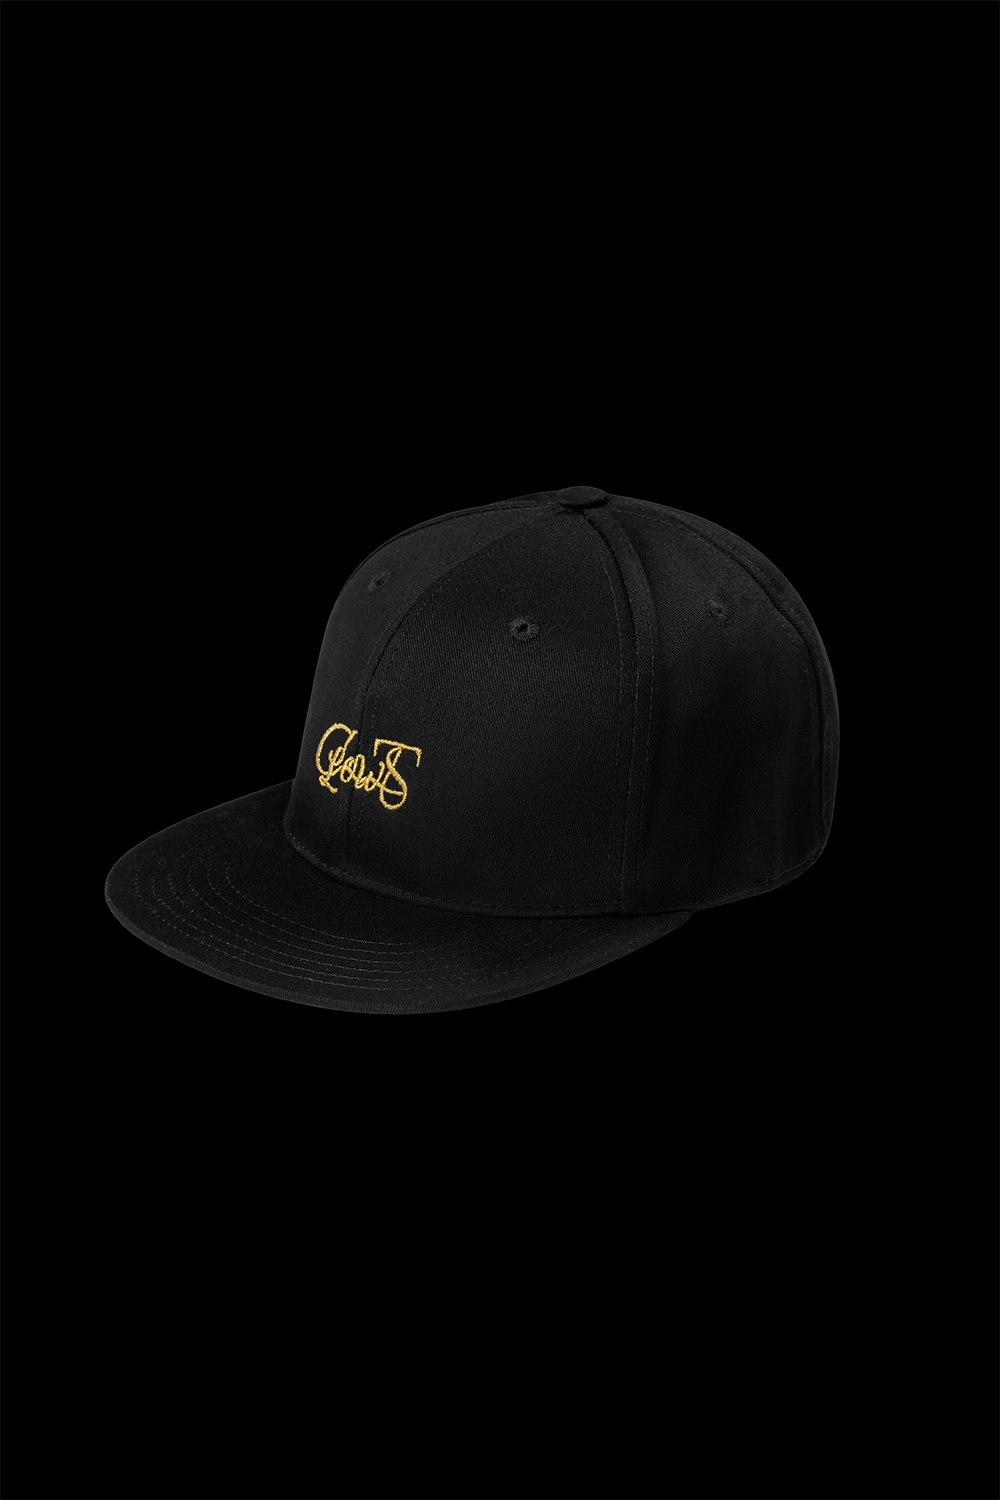 Premium Black Baseball Cap embroidered with the worlds finest Piana Clerico 24-carat gold thread- made exclusively in Italy designed in Ireland